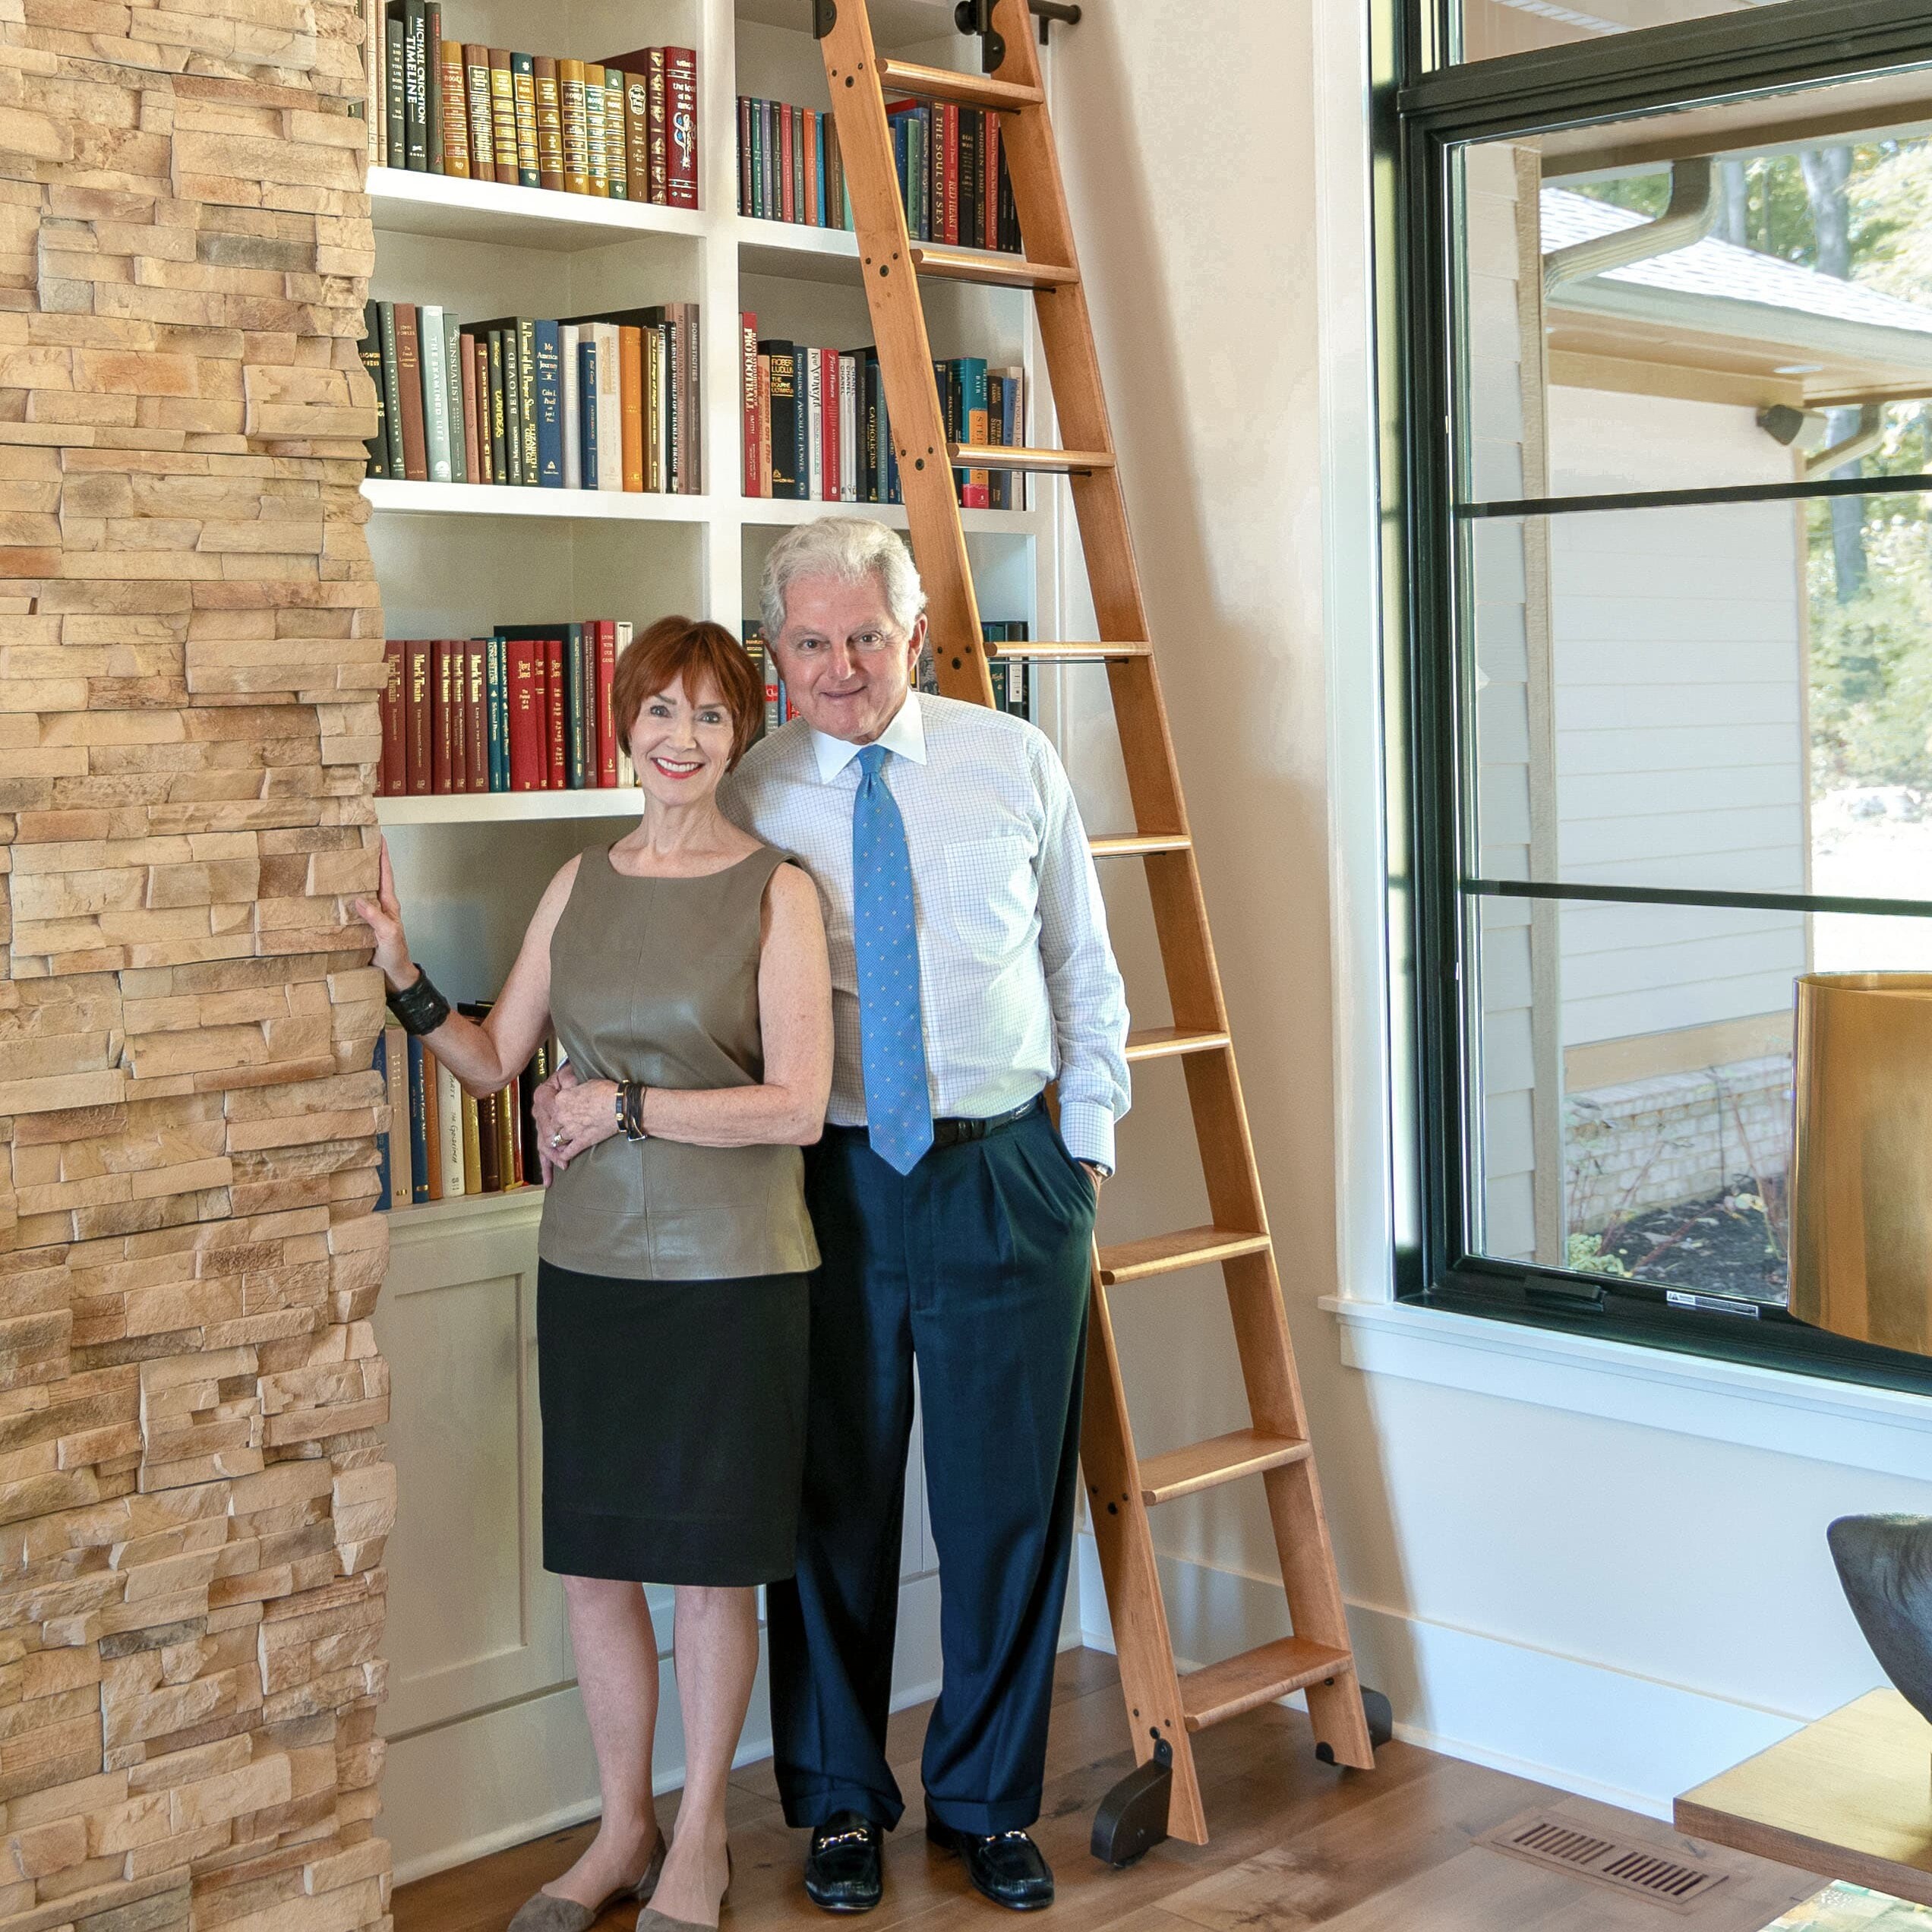 A man and woman standing next to a bookcase.